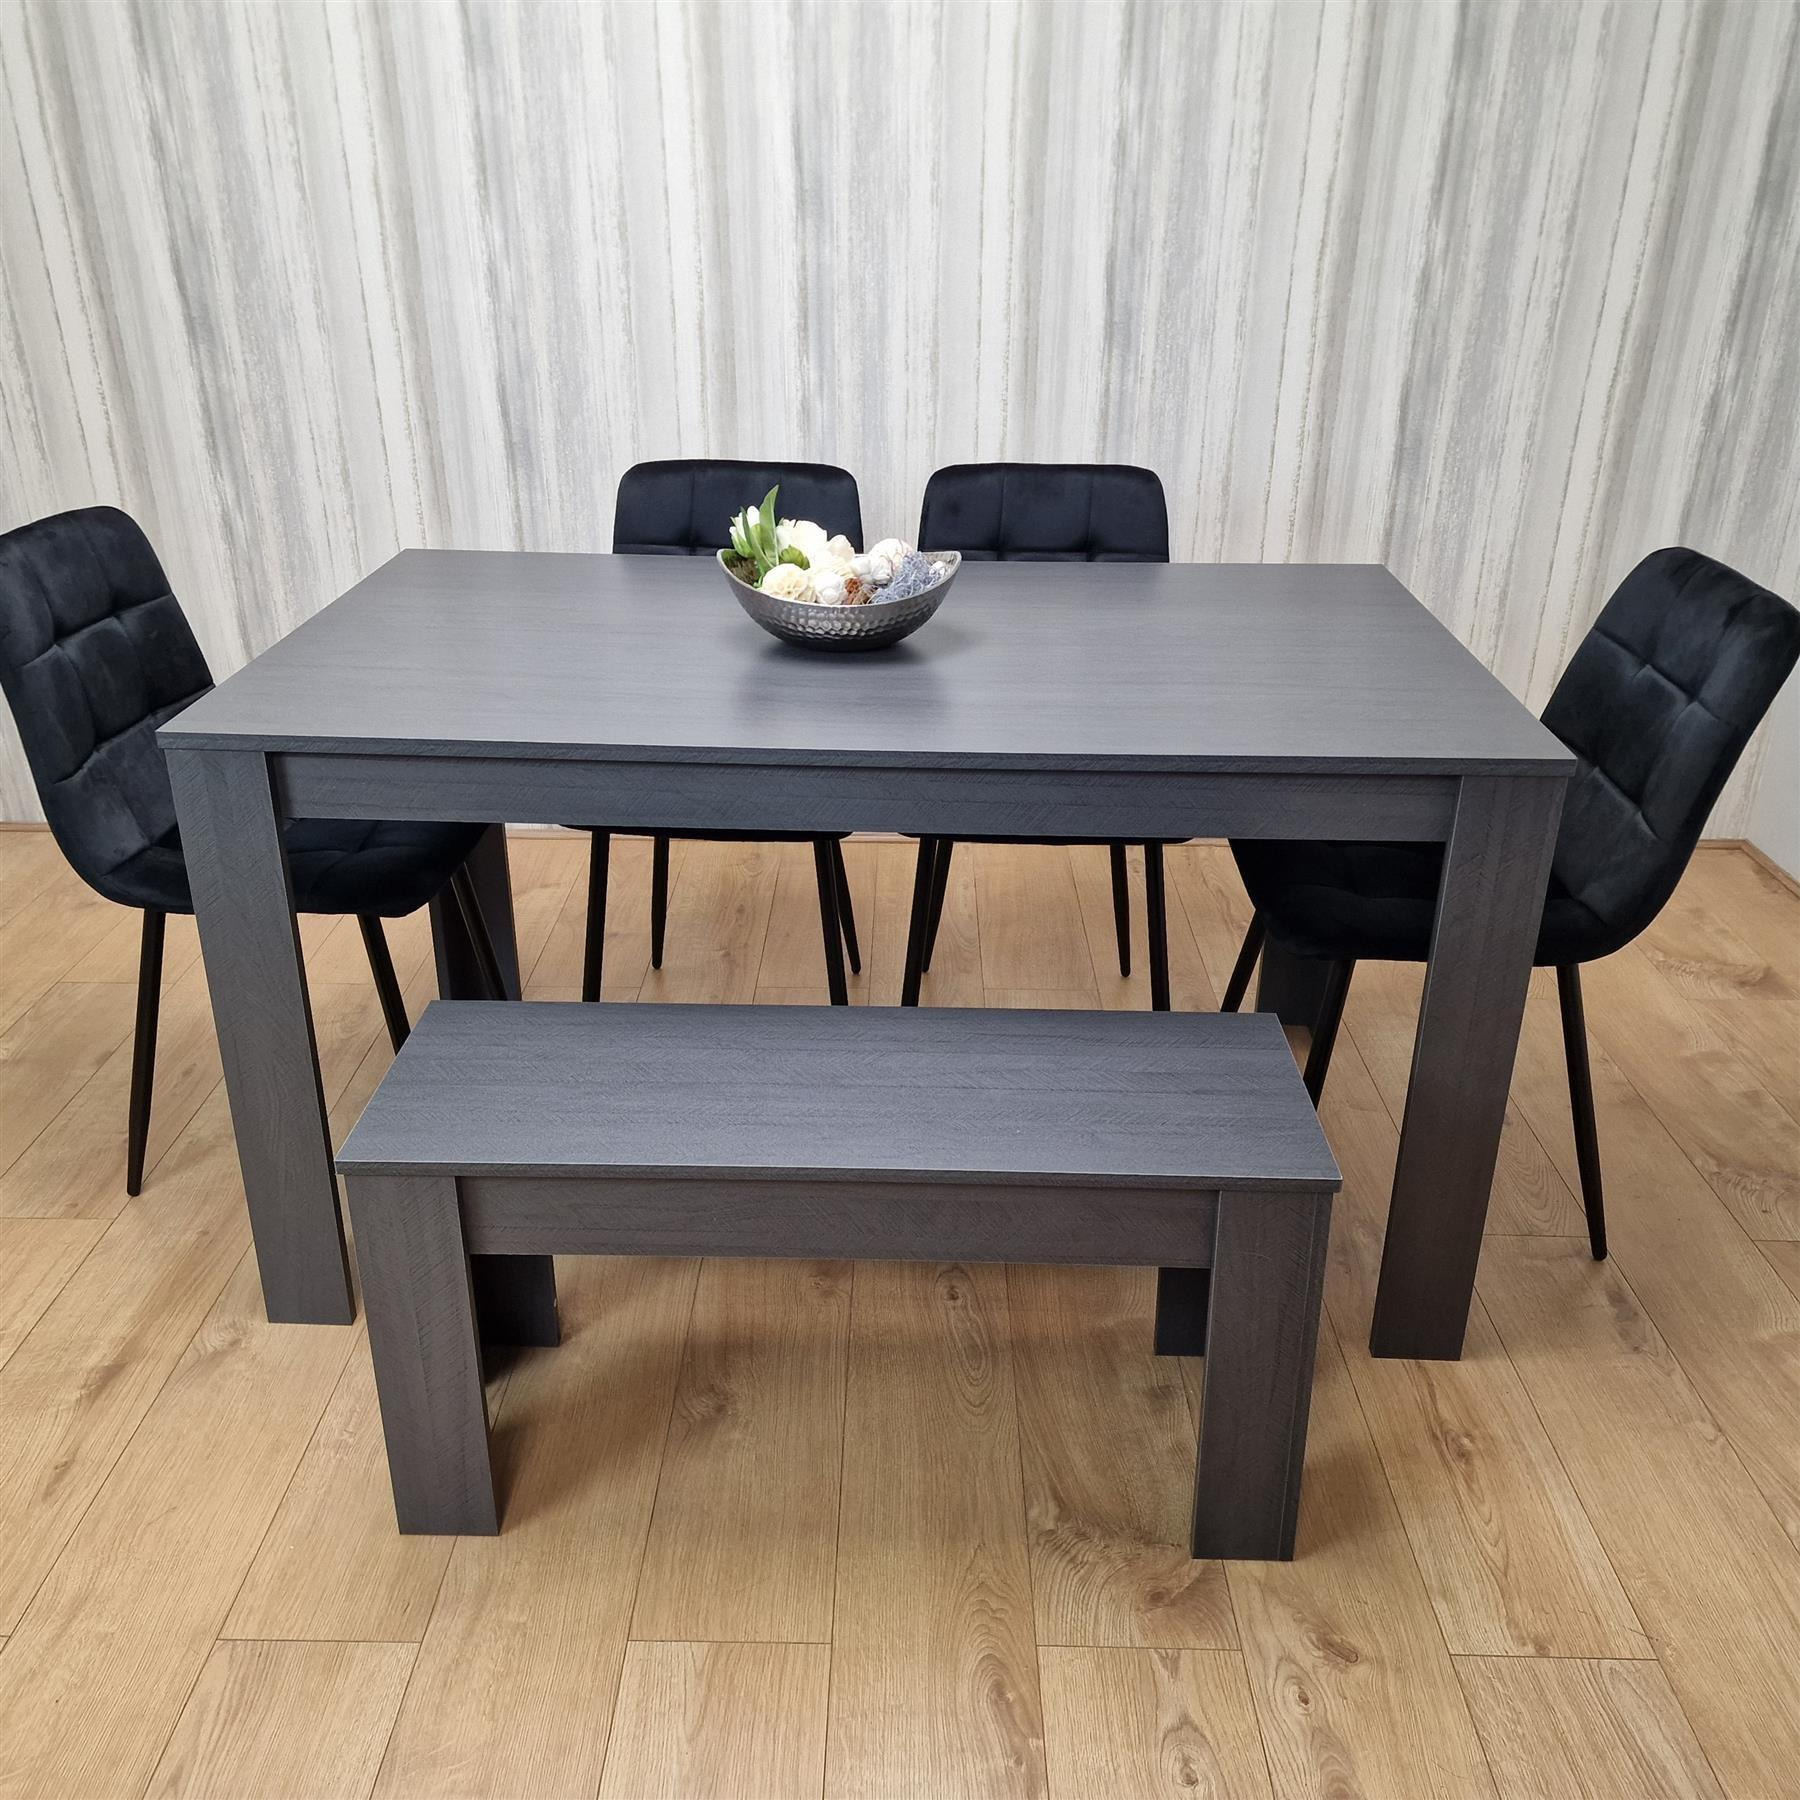 Dining Table Set with 4 Chairs and a Bench Dining Room and Kitchen table set of 4 - image 1